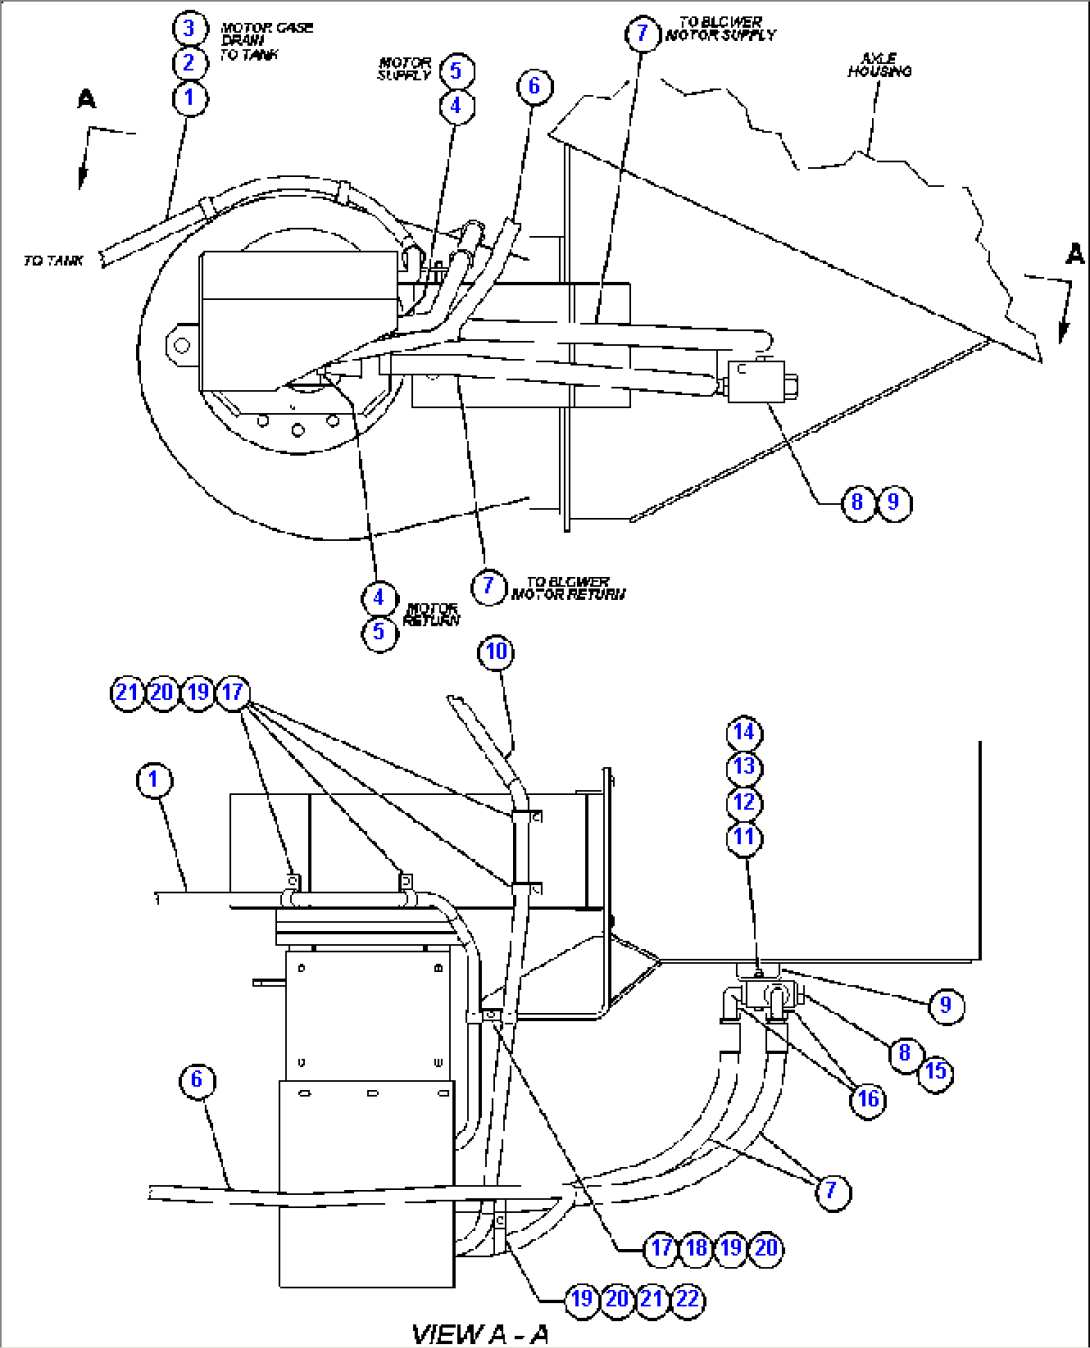 AUXILIARY BLOWER PIPING - TROLLEY